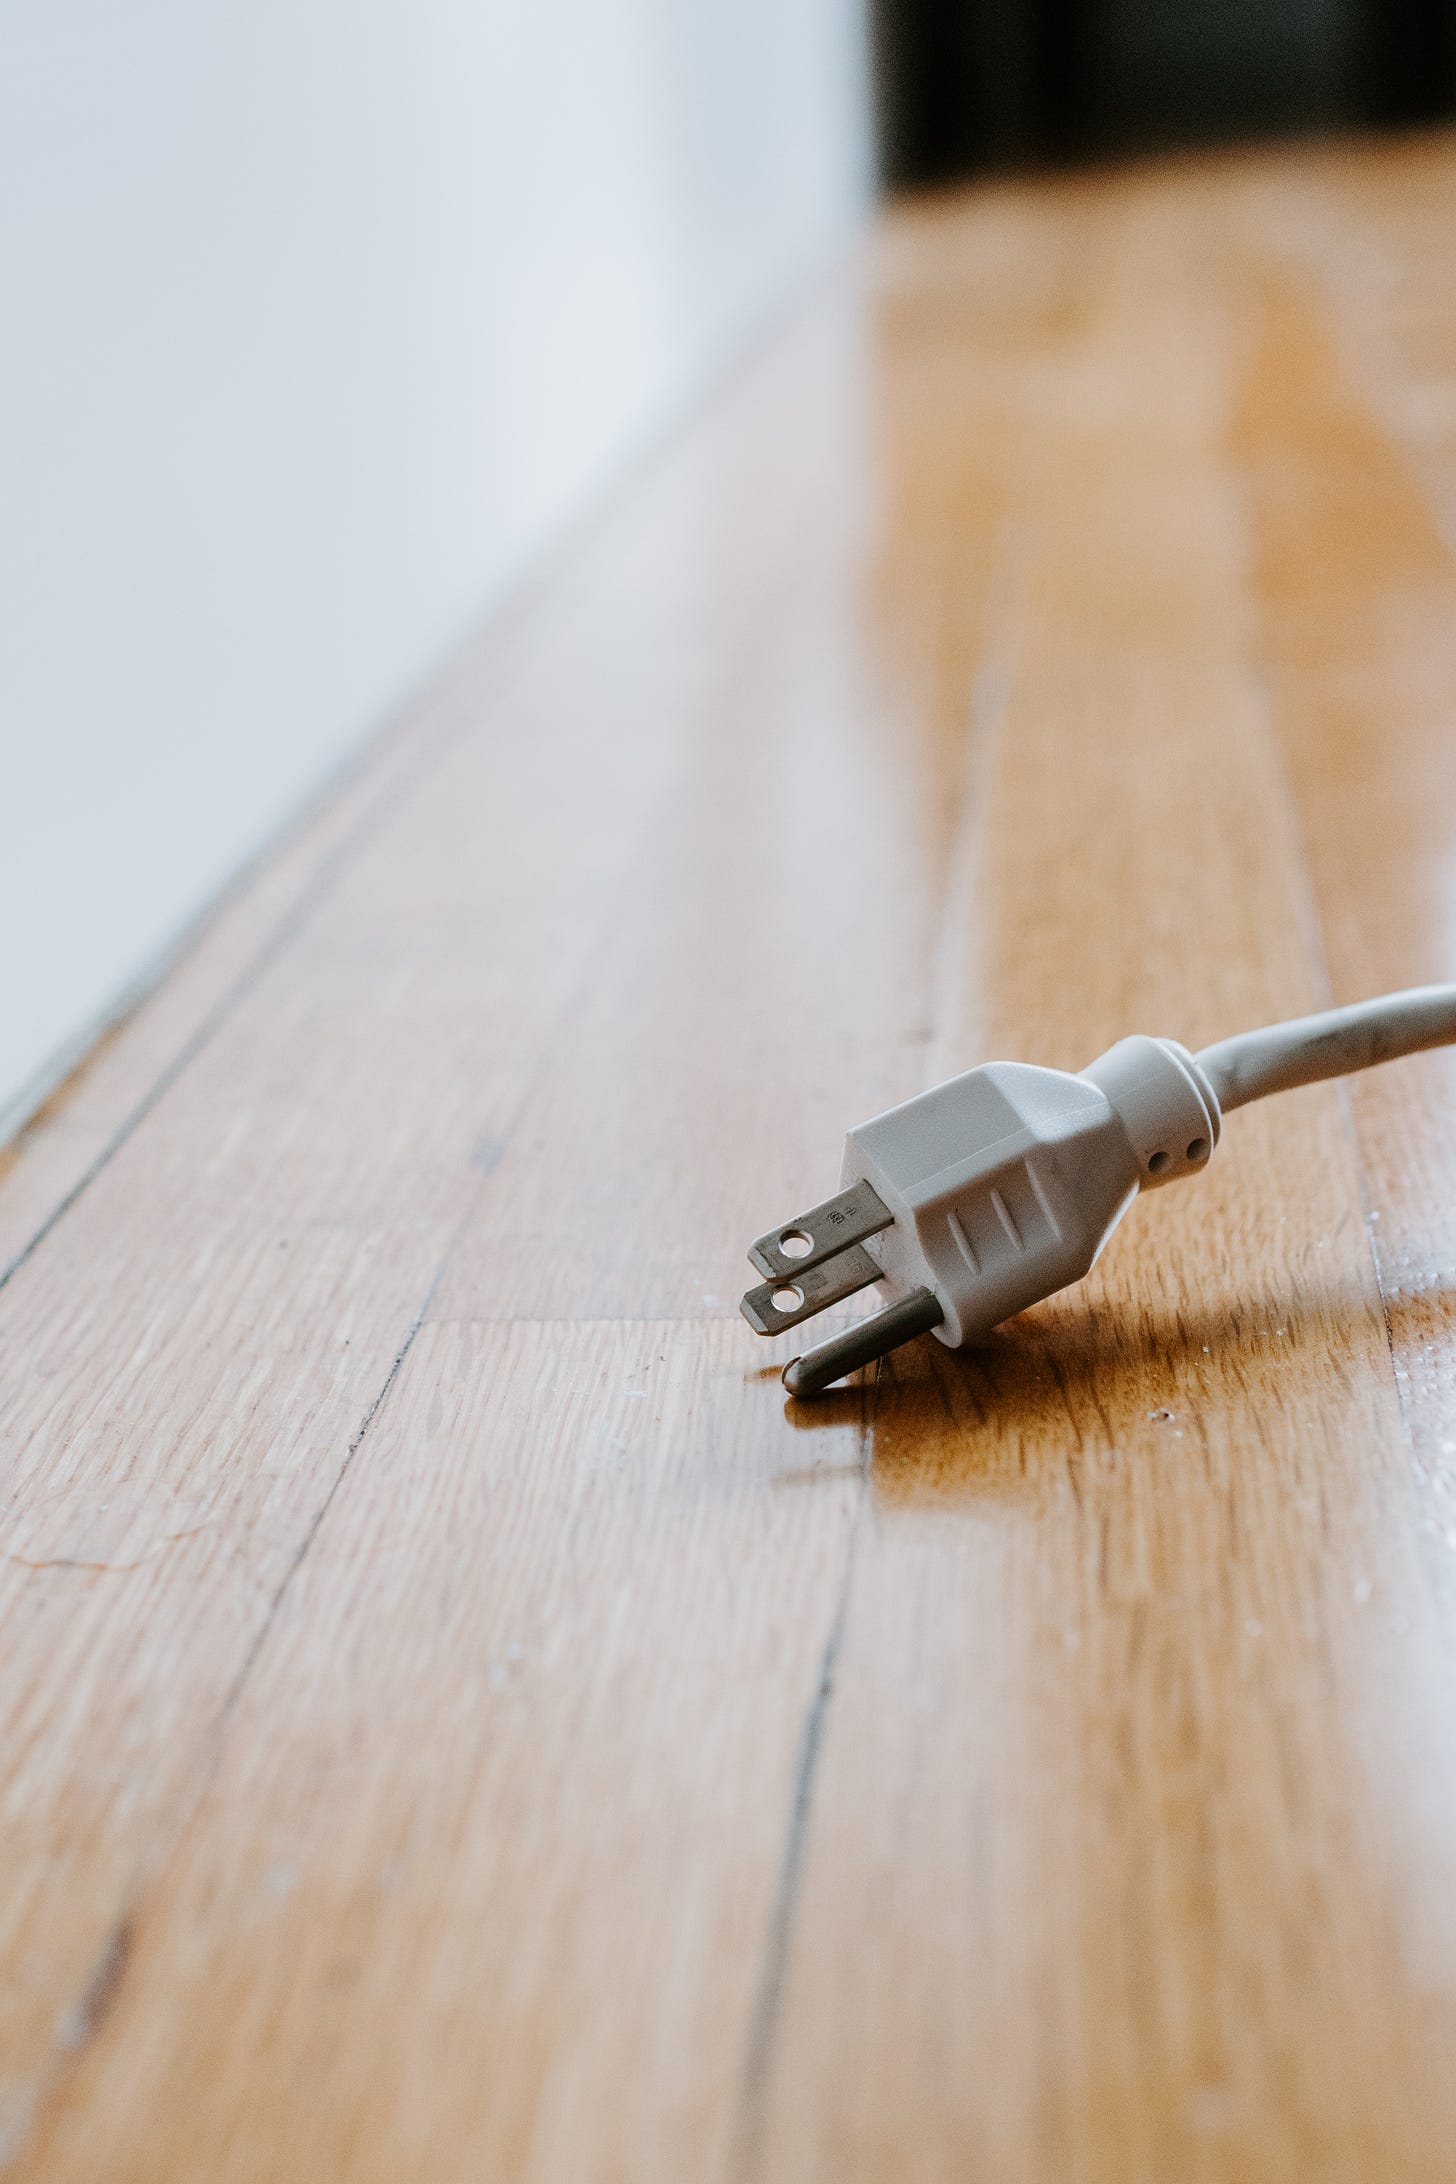 An unplugged power cable, resting on wooden floor